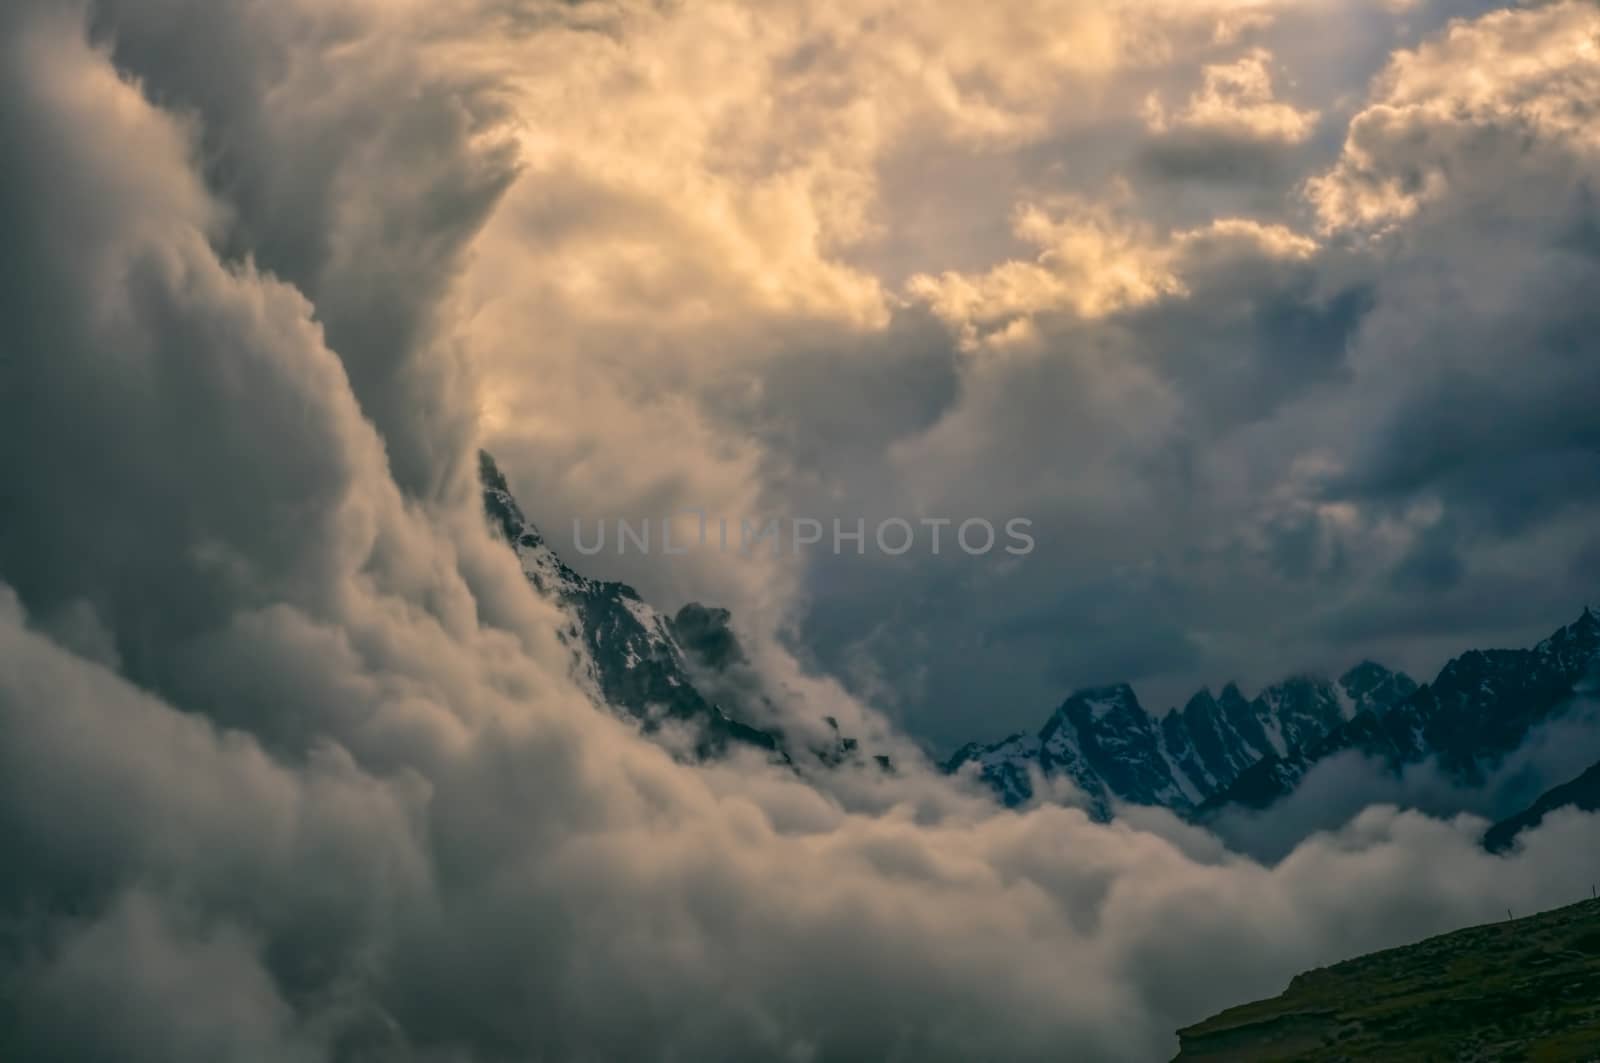 Dramatic storm clouds over Kangchenjunga mountains in Nepal